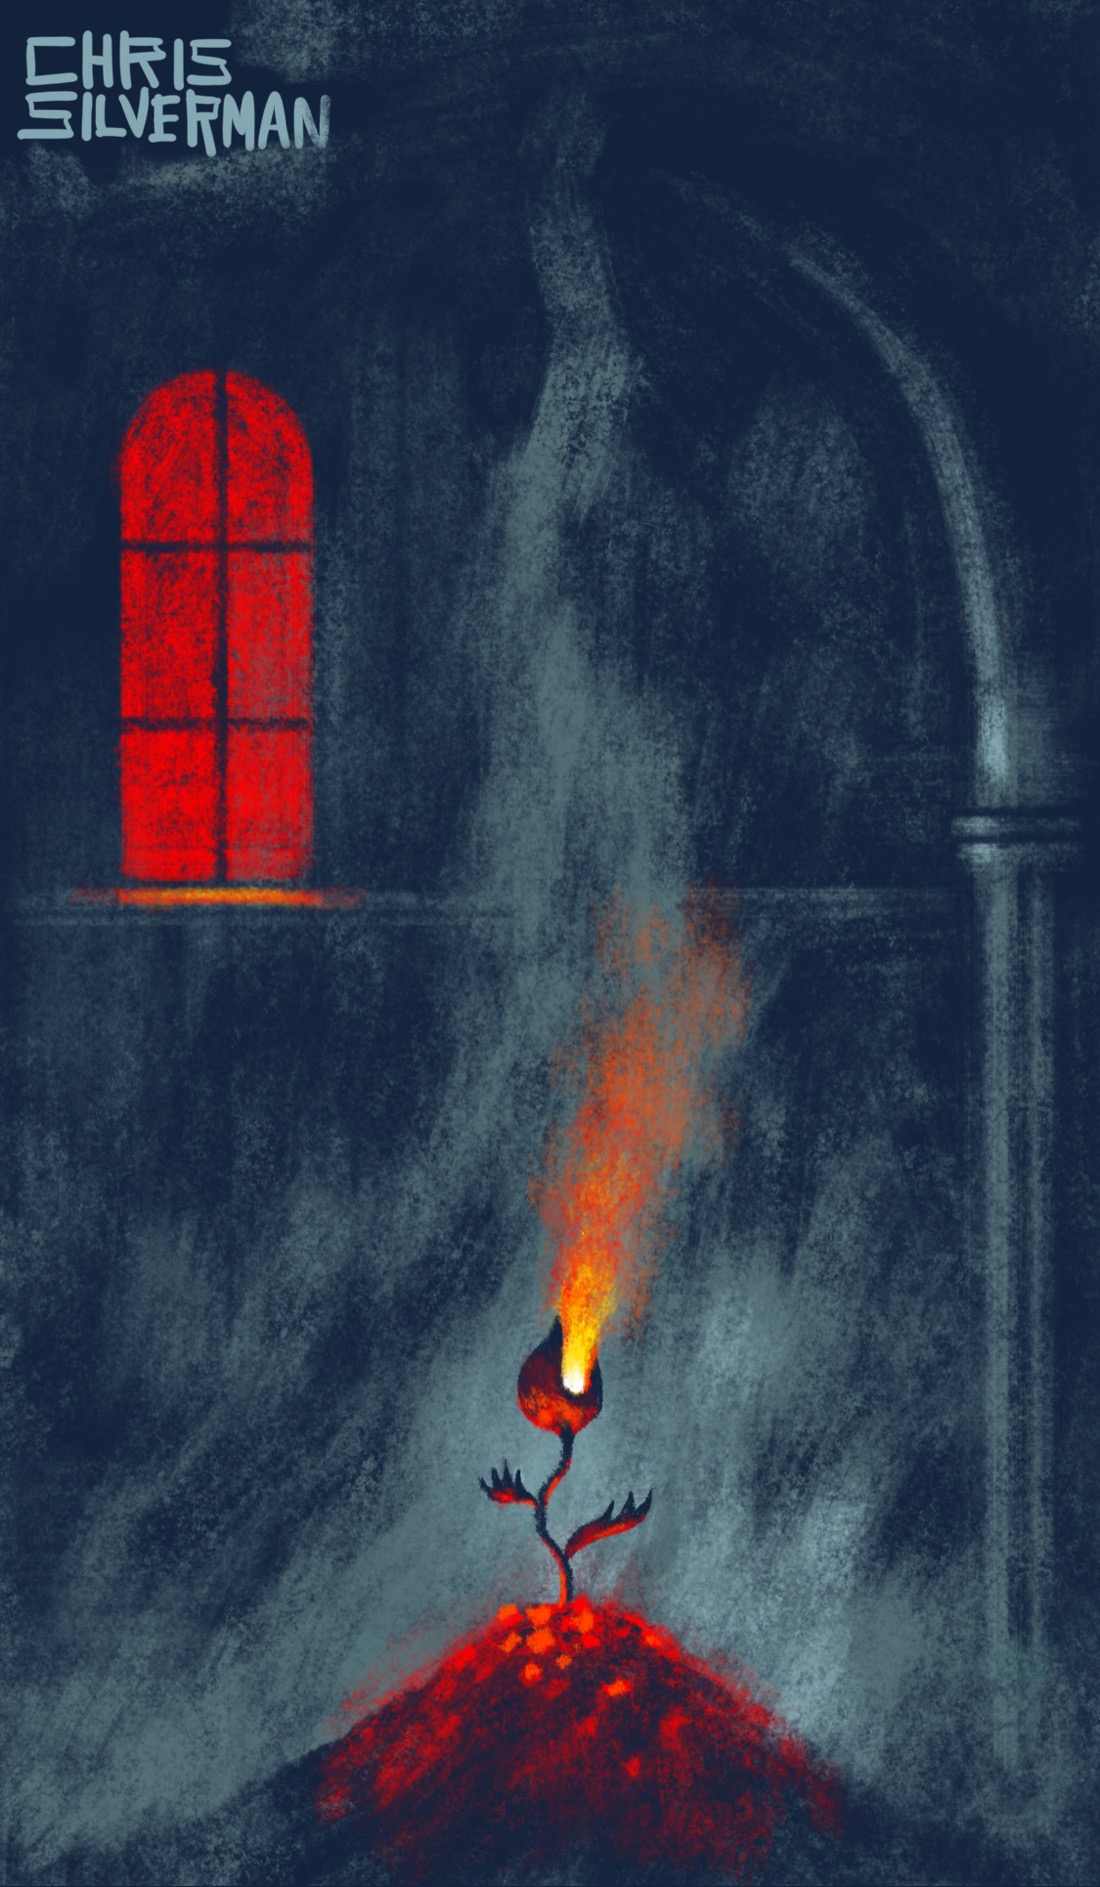 A dark, dungeon-like room. There is only one window in the top left: narrow, gothic-looking, and glowing red. To the right is some sort of dimly visible pillar or arch. In the center of the room is a glowing pile of coals, gray smoke billowing from it. Rising up from the very center of the coals is what appears to be a small, black plant with leaves that look like claws. The underside of the plant is illuminated red in the glow from the embers. The flower part of the plant suggests a creature, or a Venus flytrap: two mandibles open, belching yellow fire.